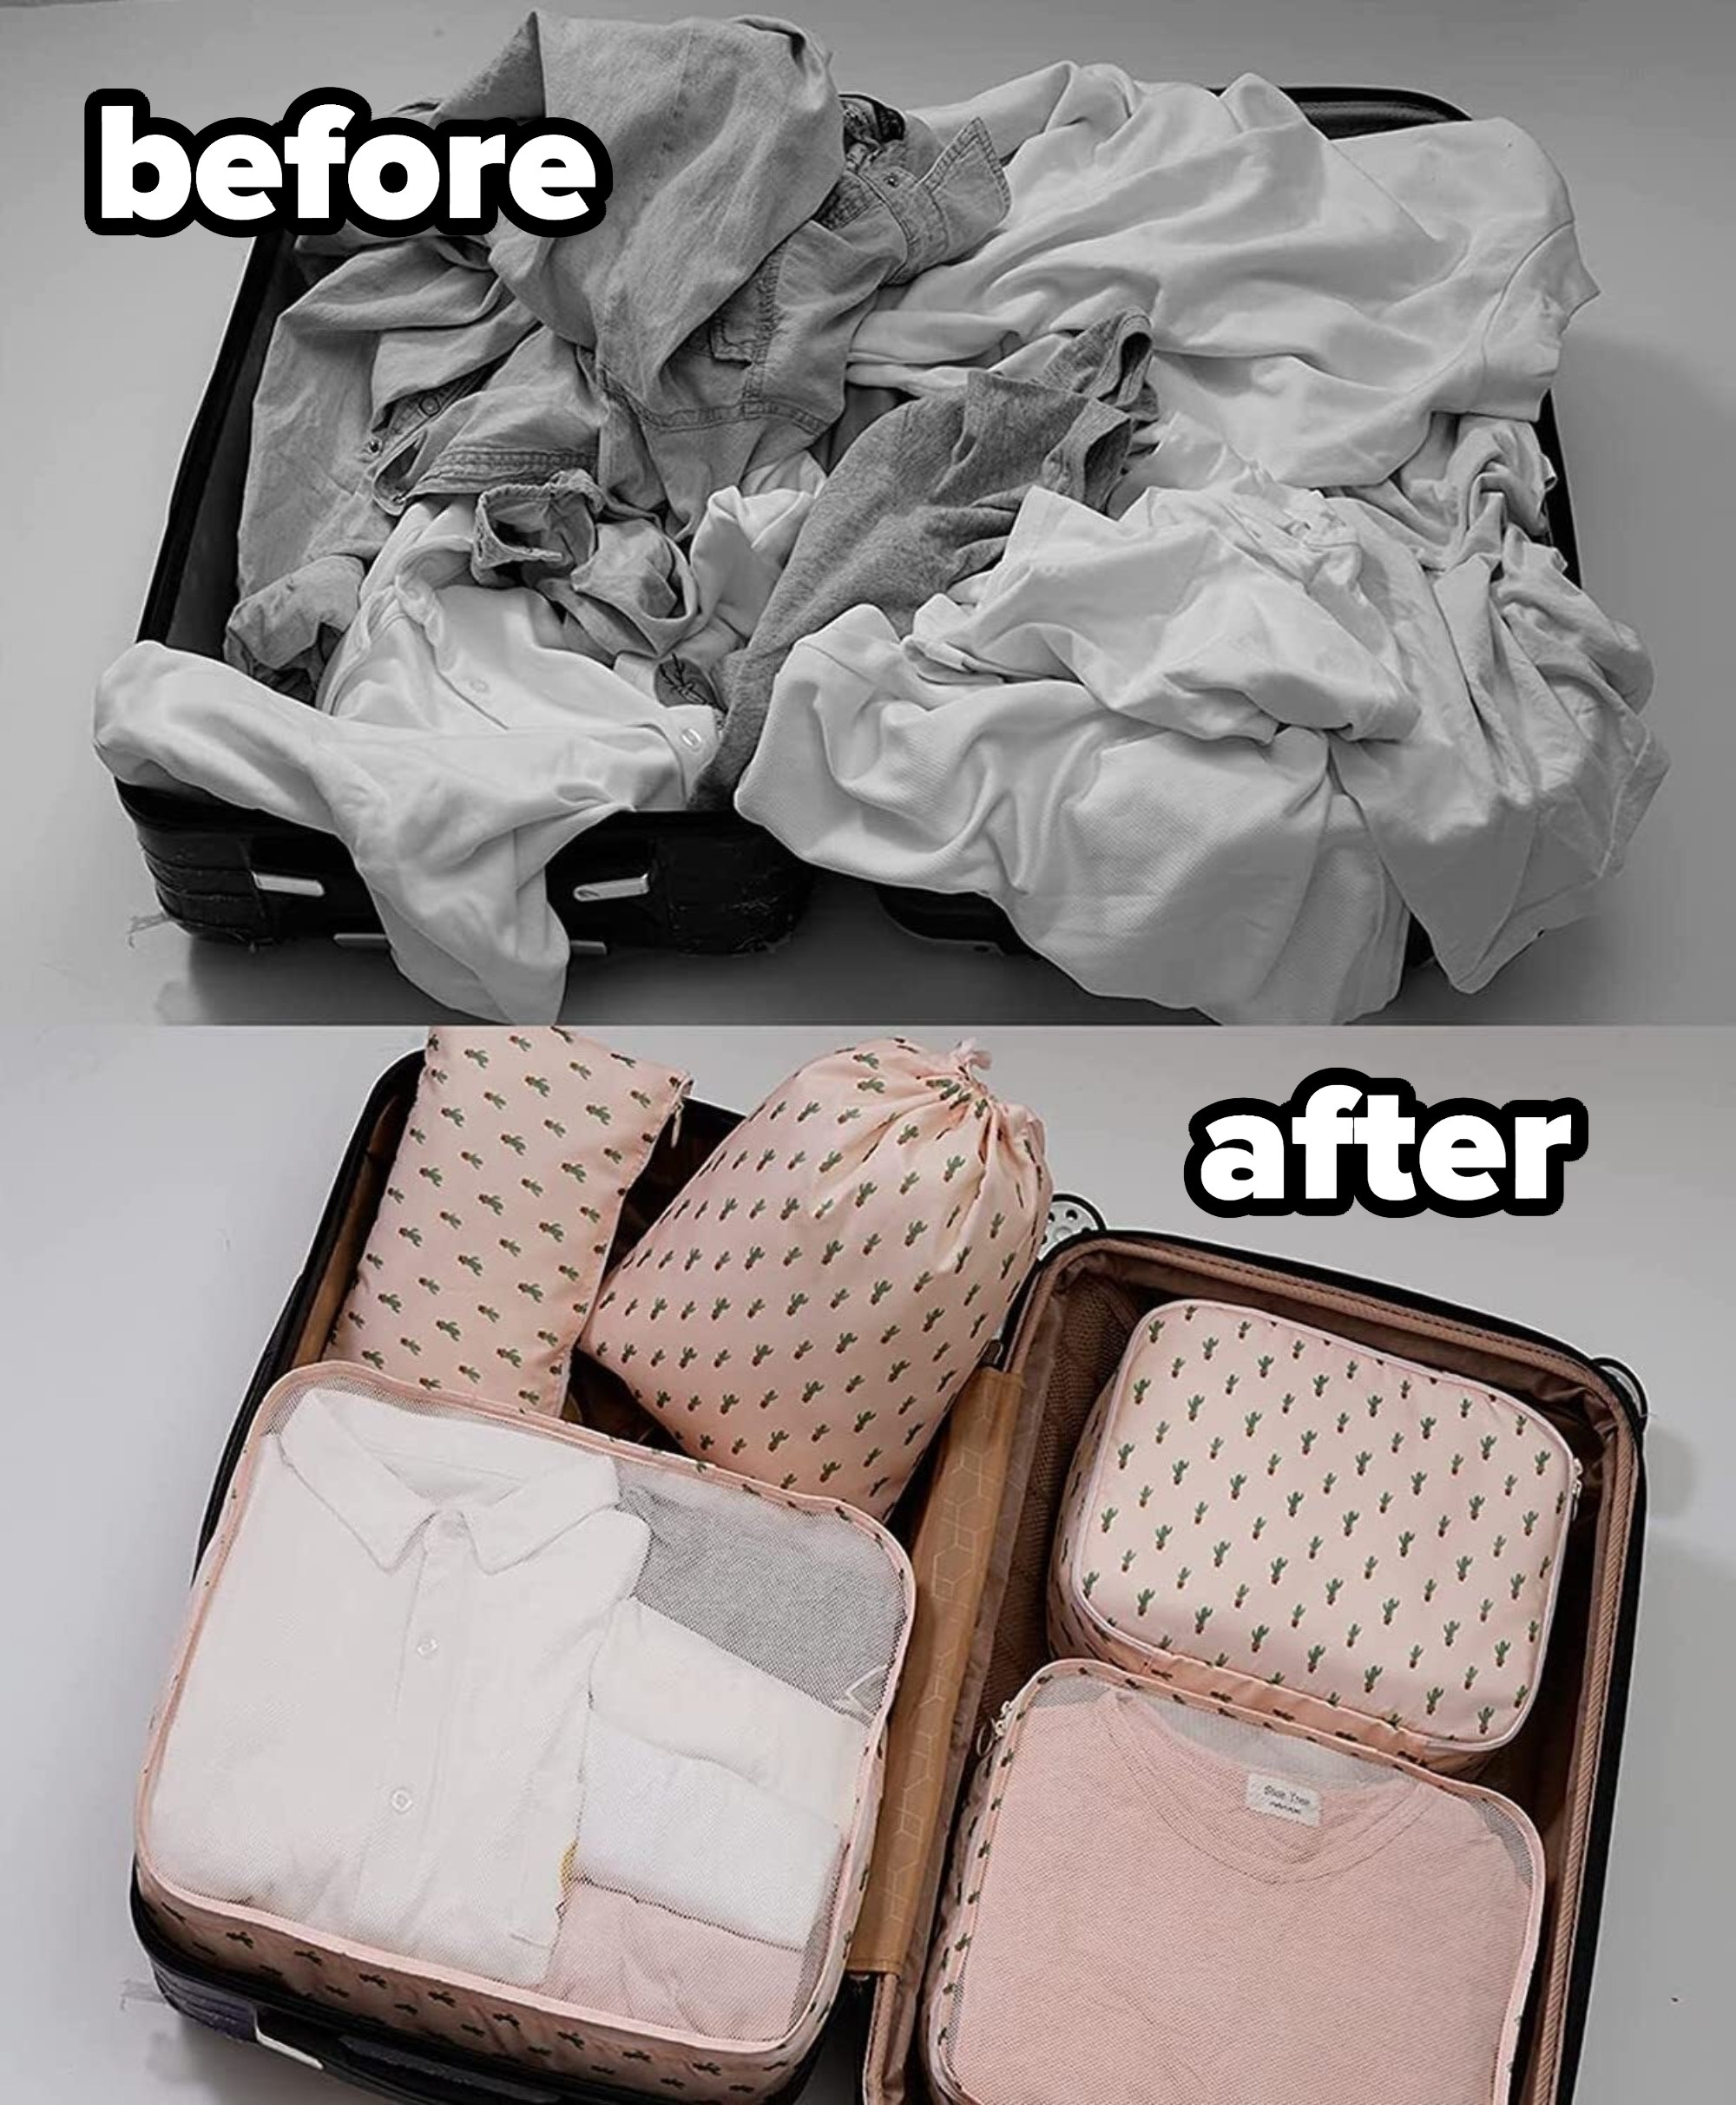 A before and after of a messy suitcase and then with the packing cubes